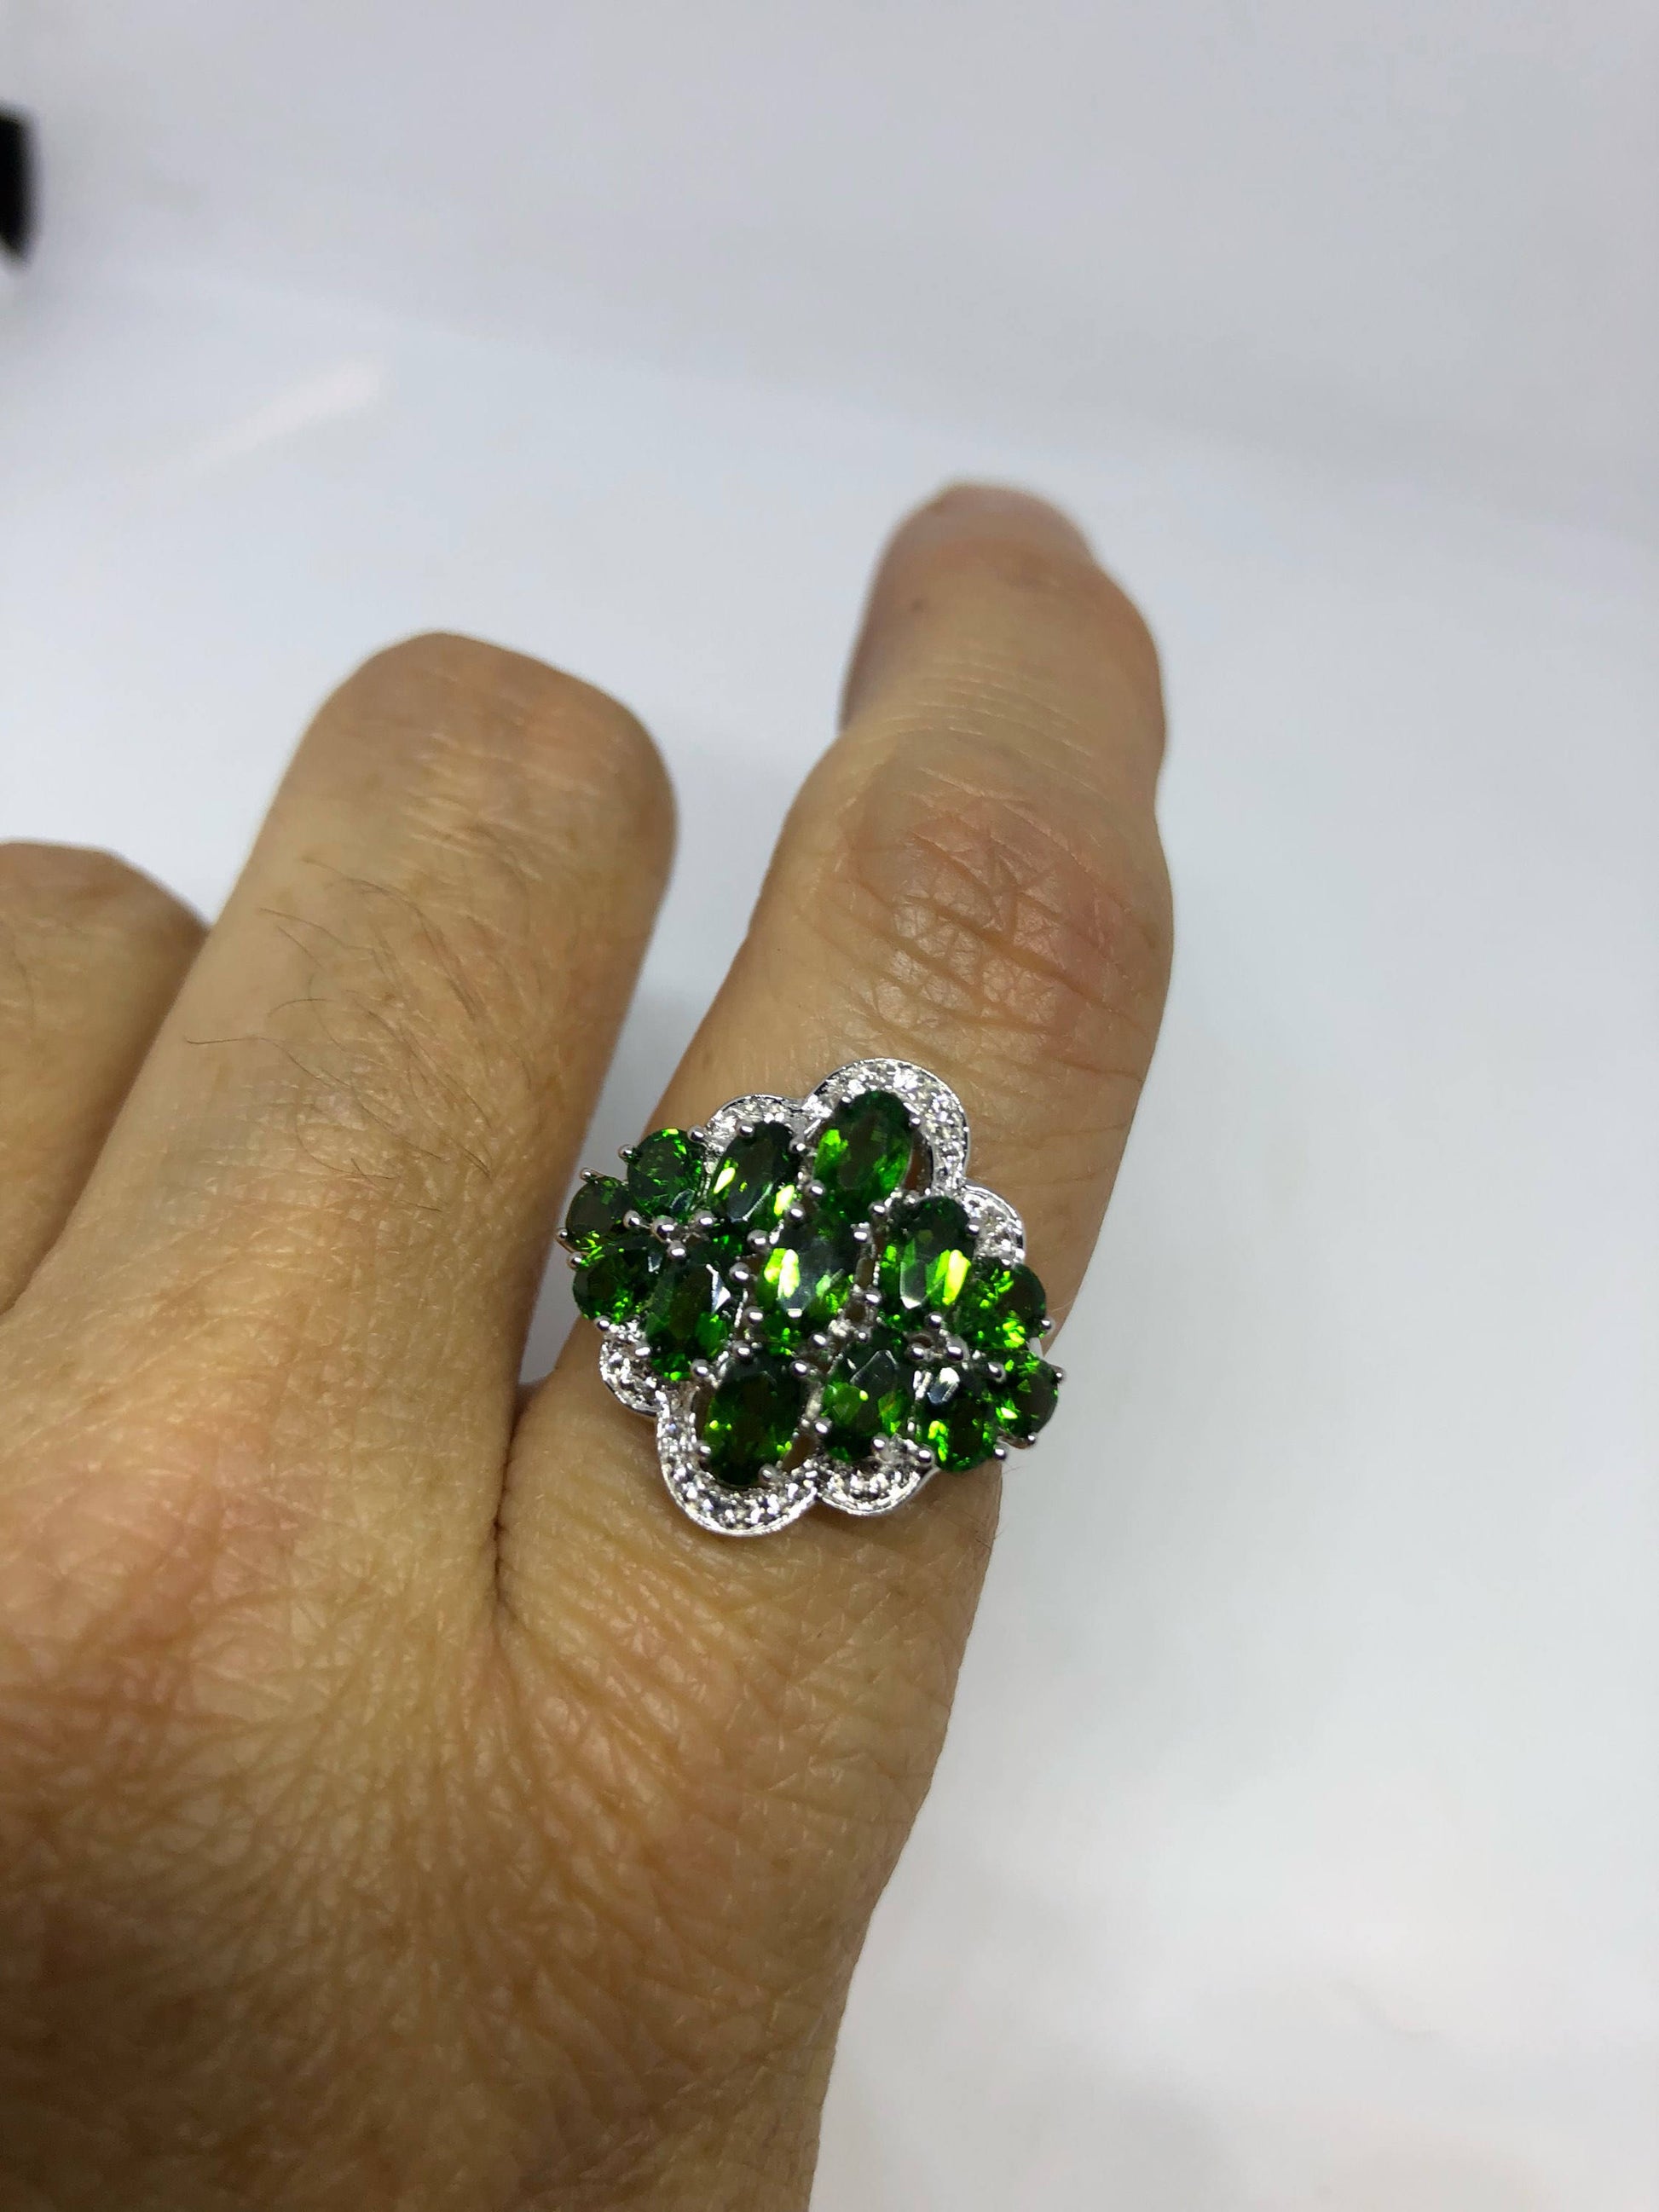 Vintage Handmade Genuine Green Chrome Diopside Setting 925 Sterling Silver Gothic Ring